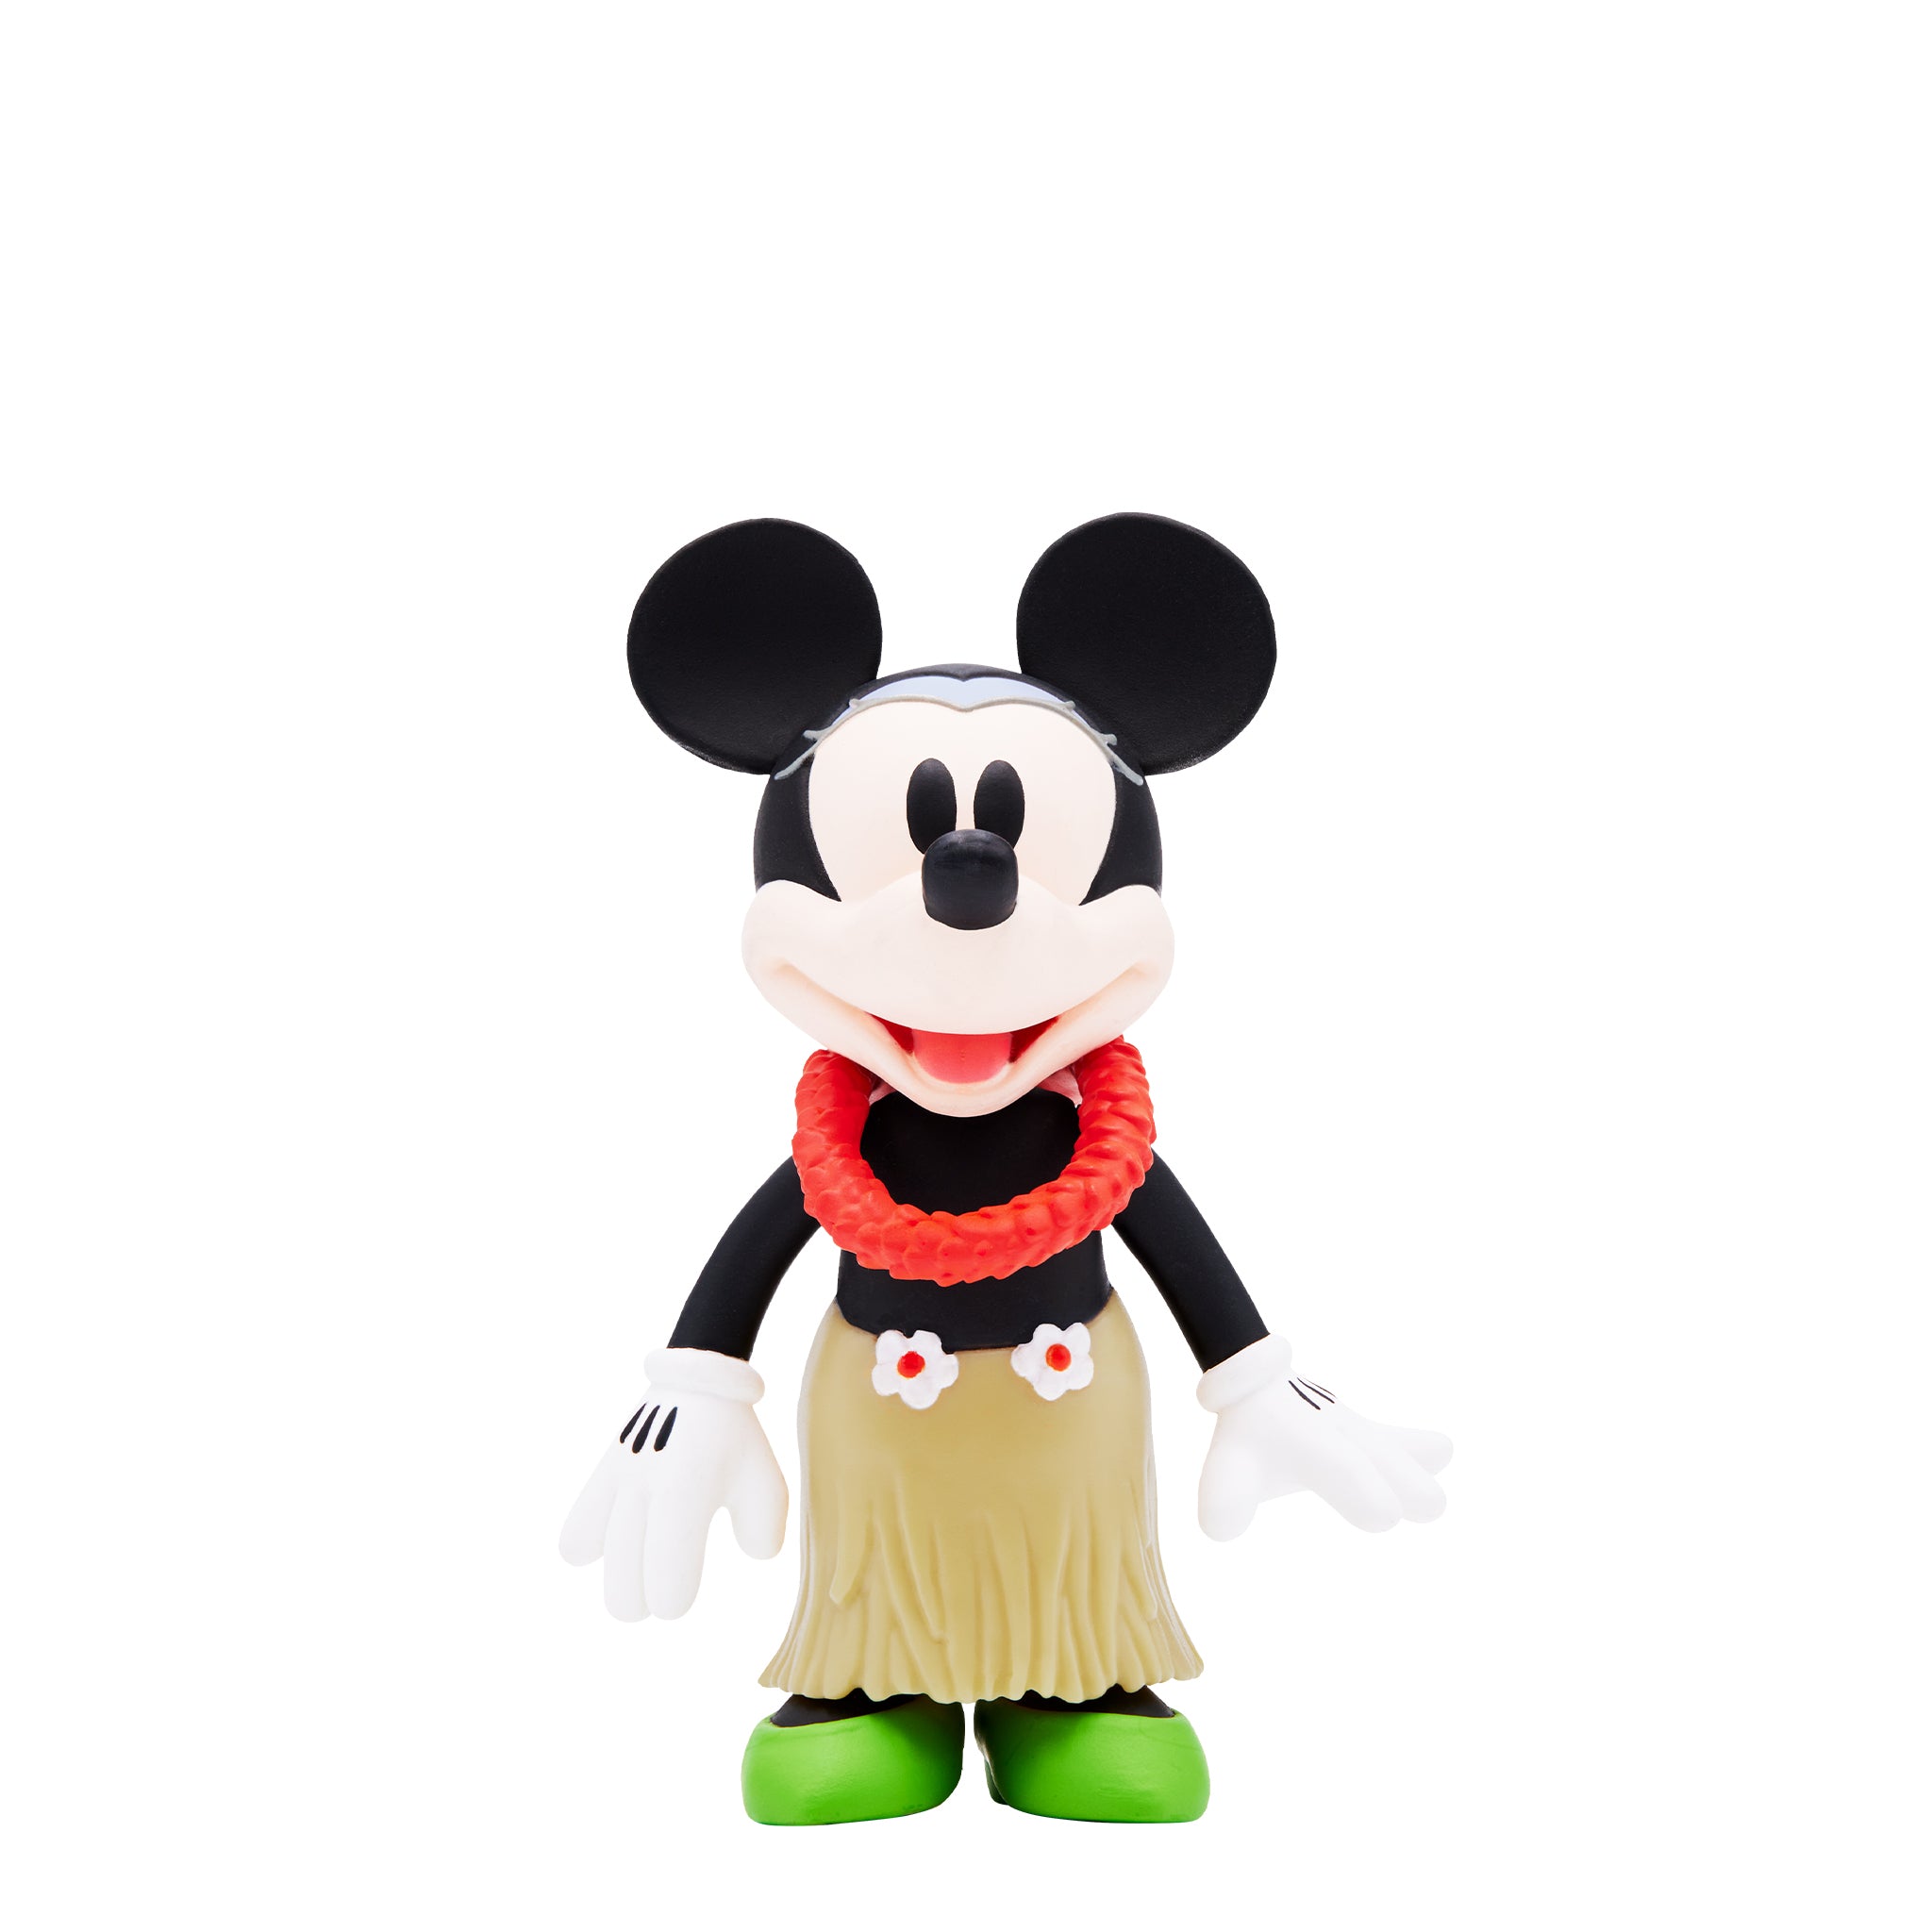 Disney ReAction Figures - Vintage Collection Wave 2 - Minnie Mouse (Hawaiian Holiday)